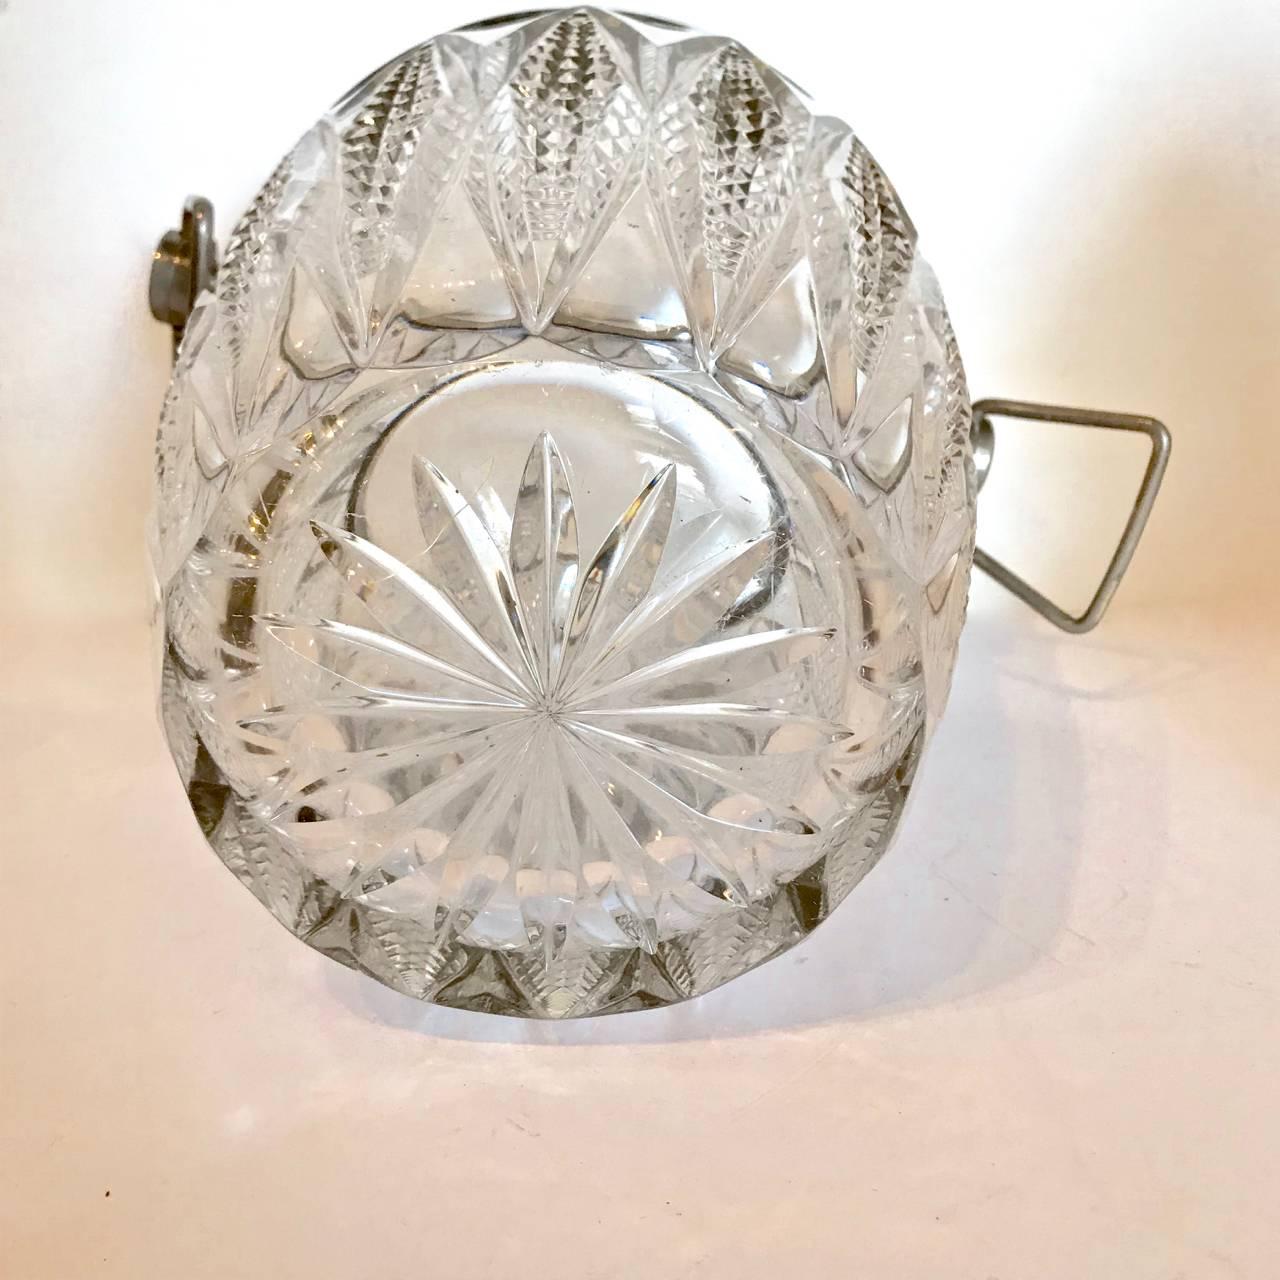 European Cut Crystal and Silver Plate Ice Bucket, 20th Century